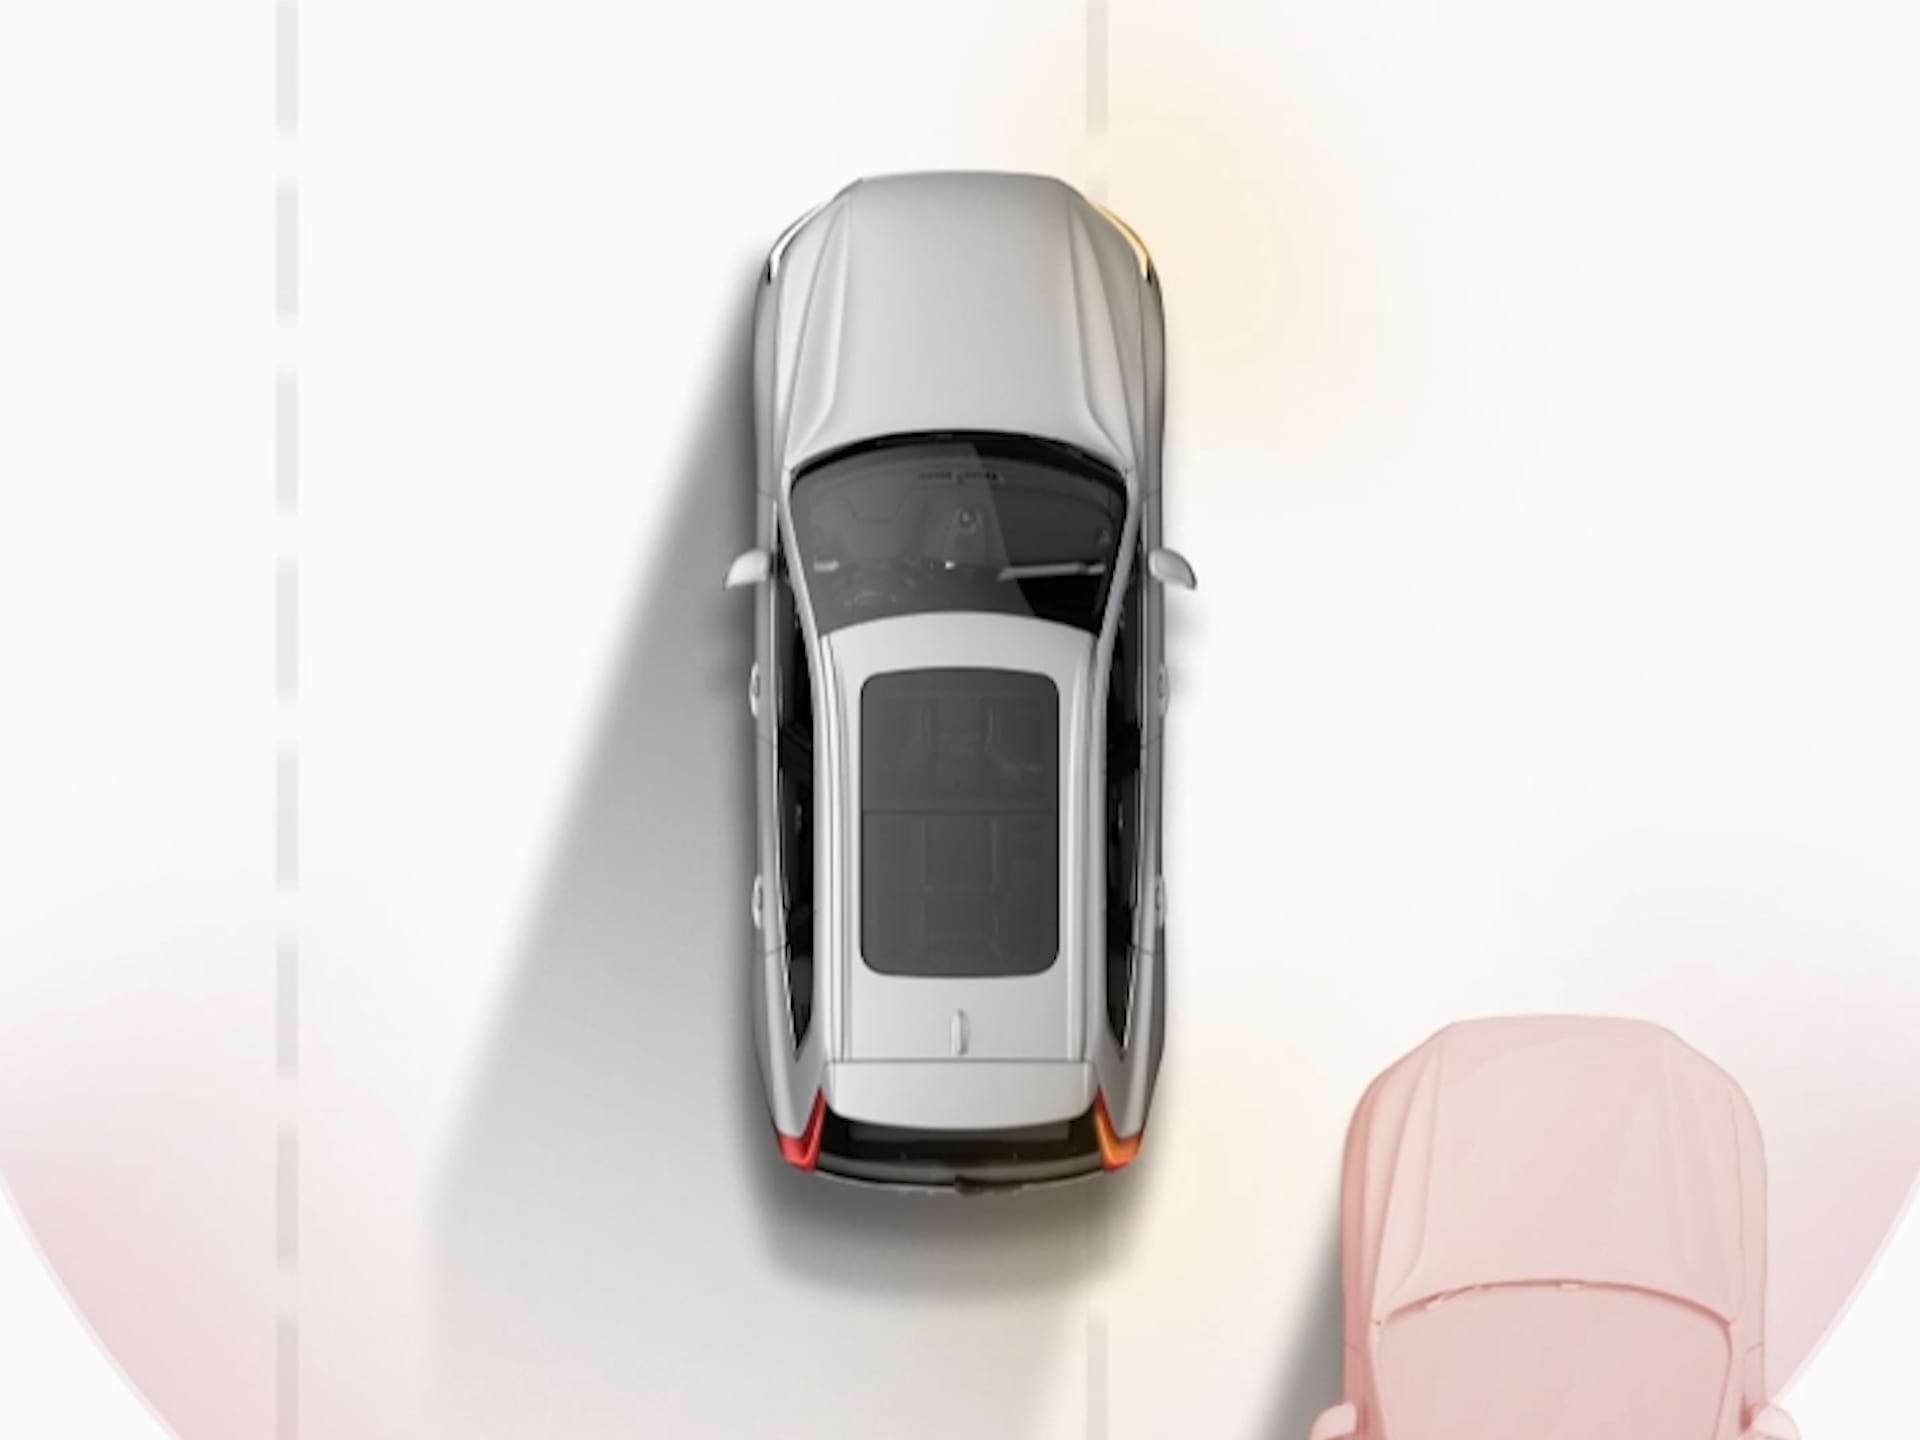 An illustrated image of a Volvo car from overhead driving alongside other vehicles.